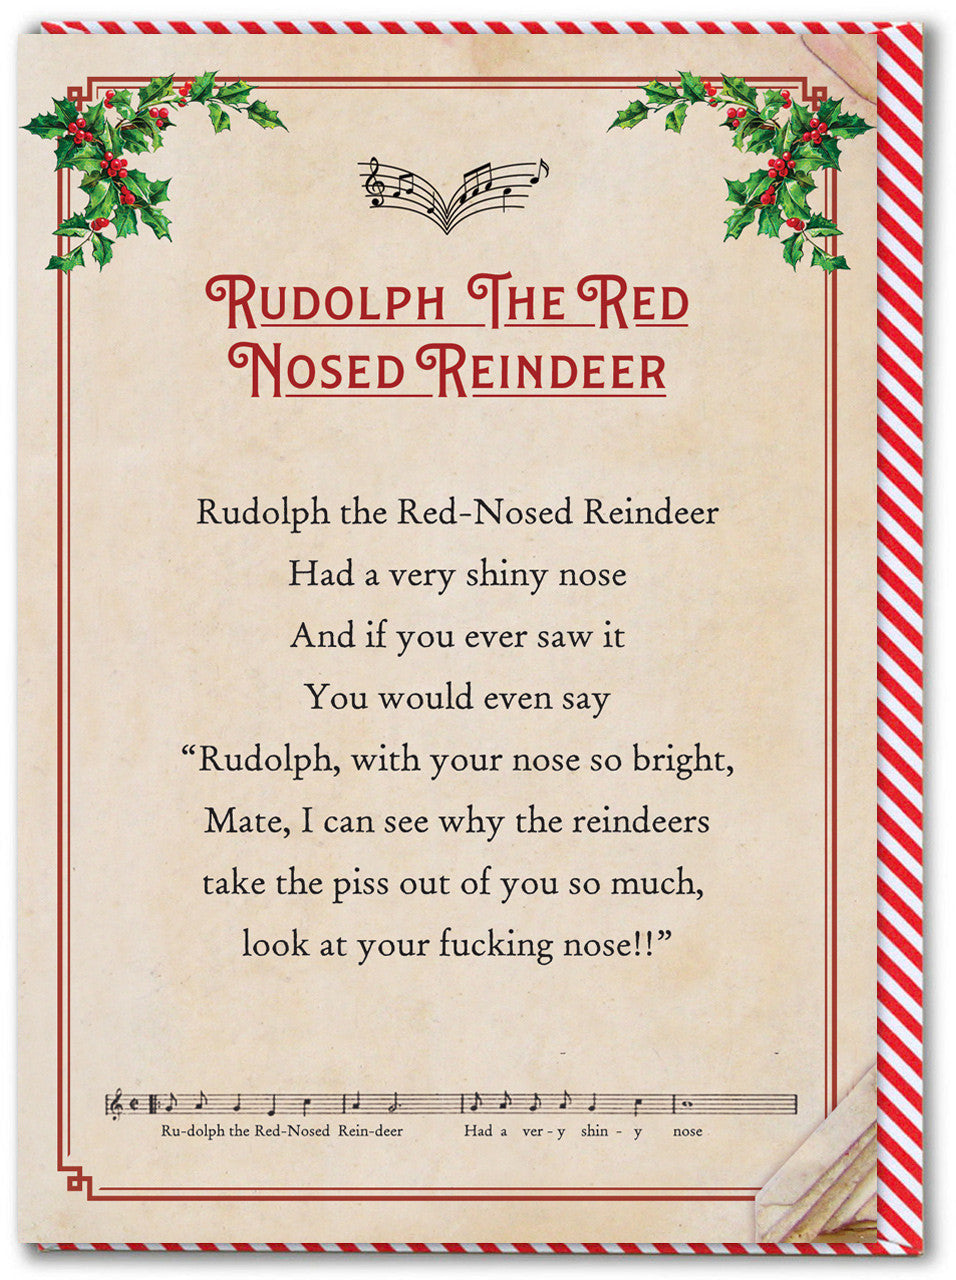 Saucy Christmas Songbook Card - Rudolph the Red Nosed Reindeer - sweary Christmas card - Brainbox Candy